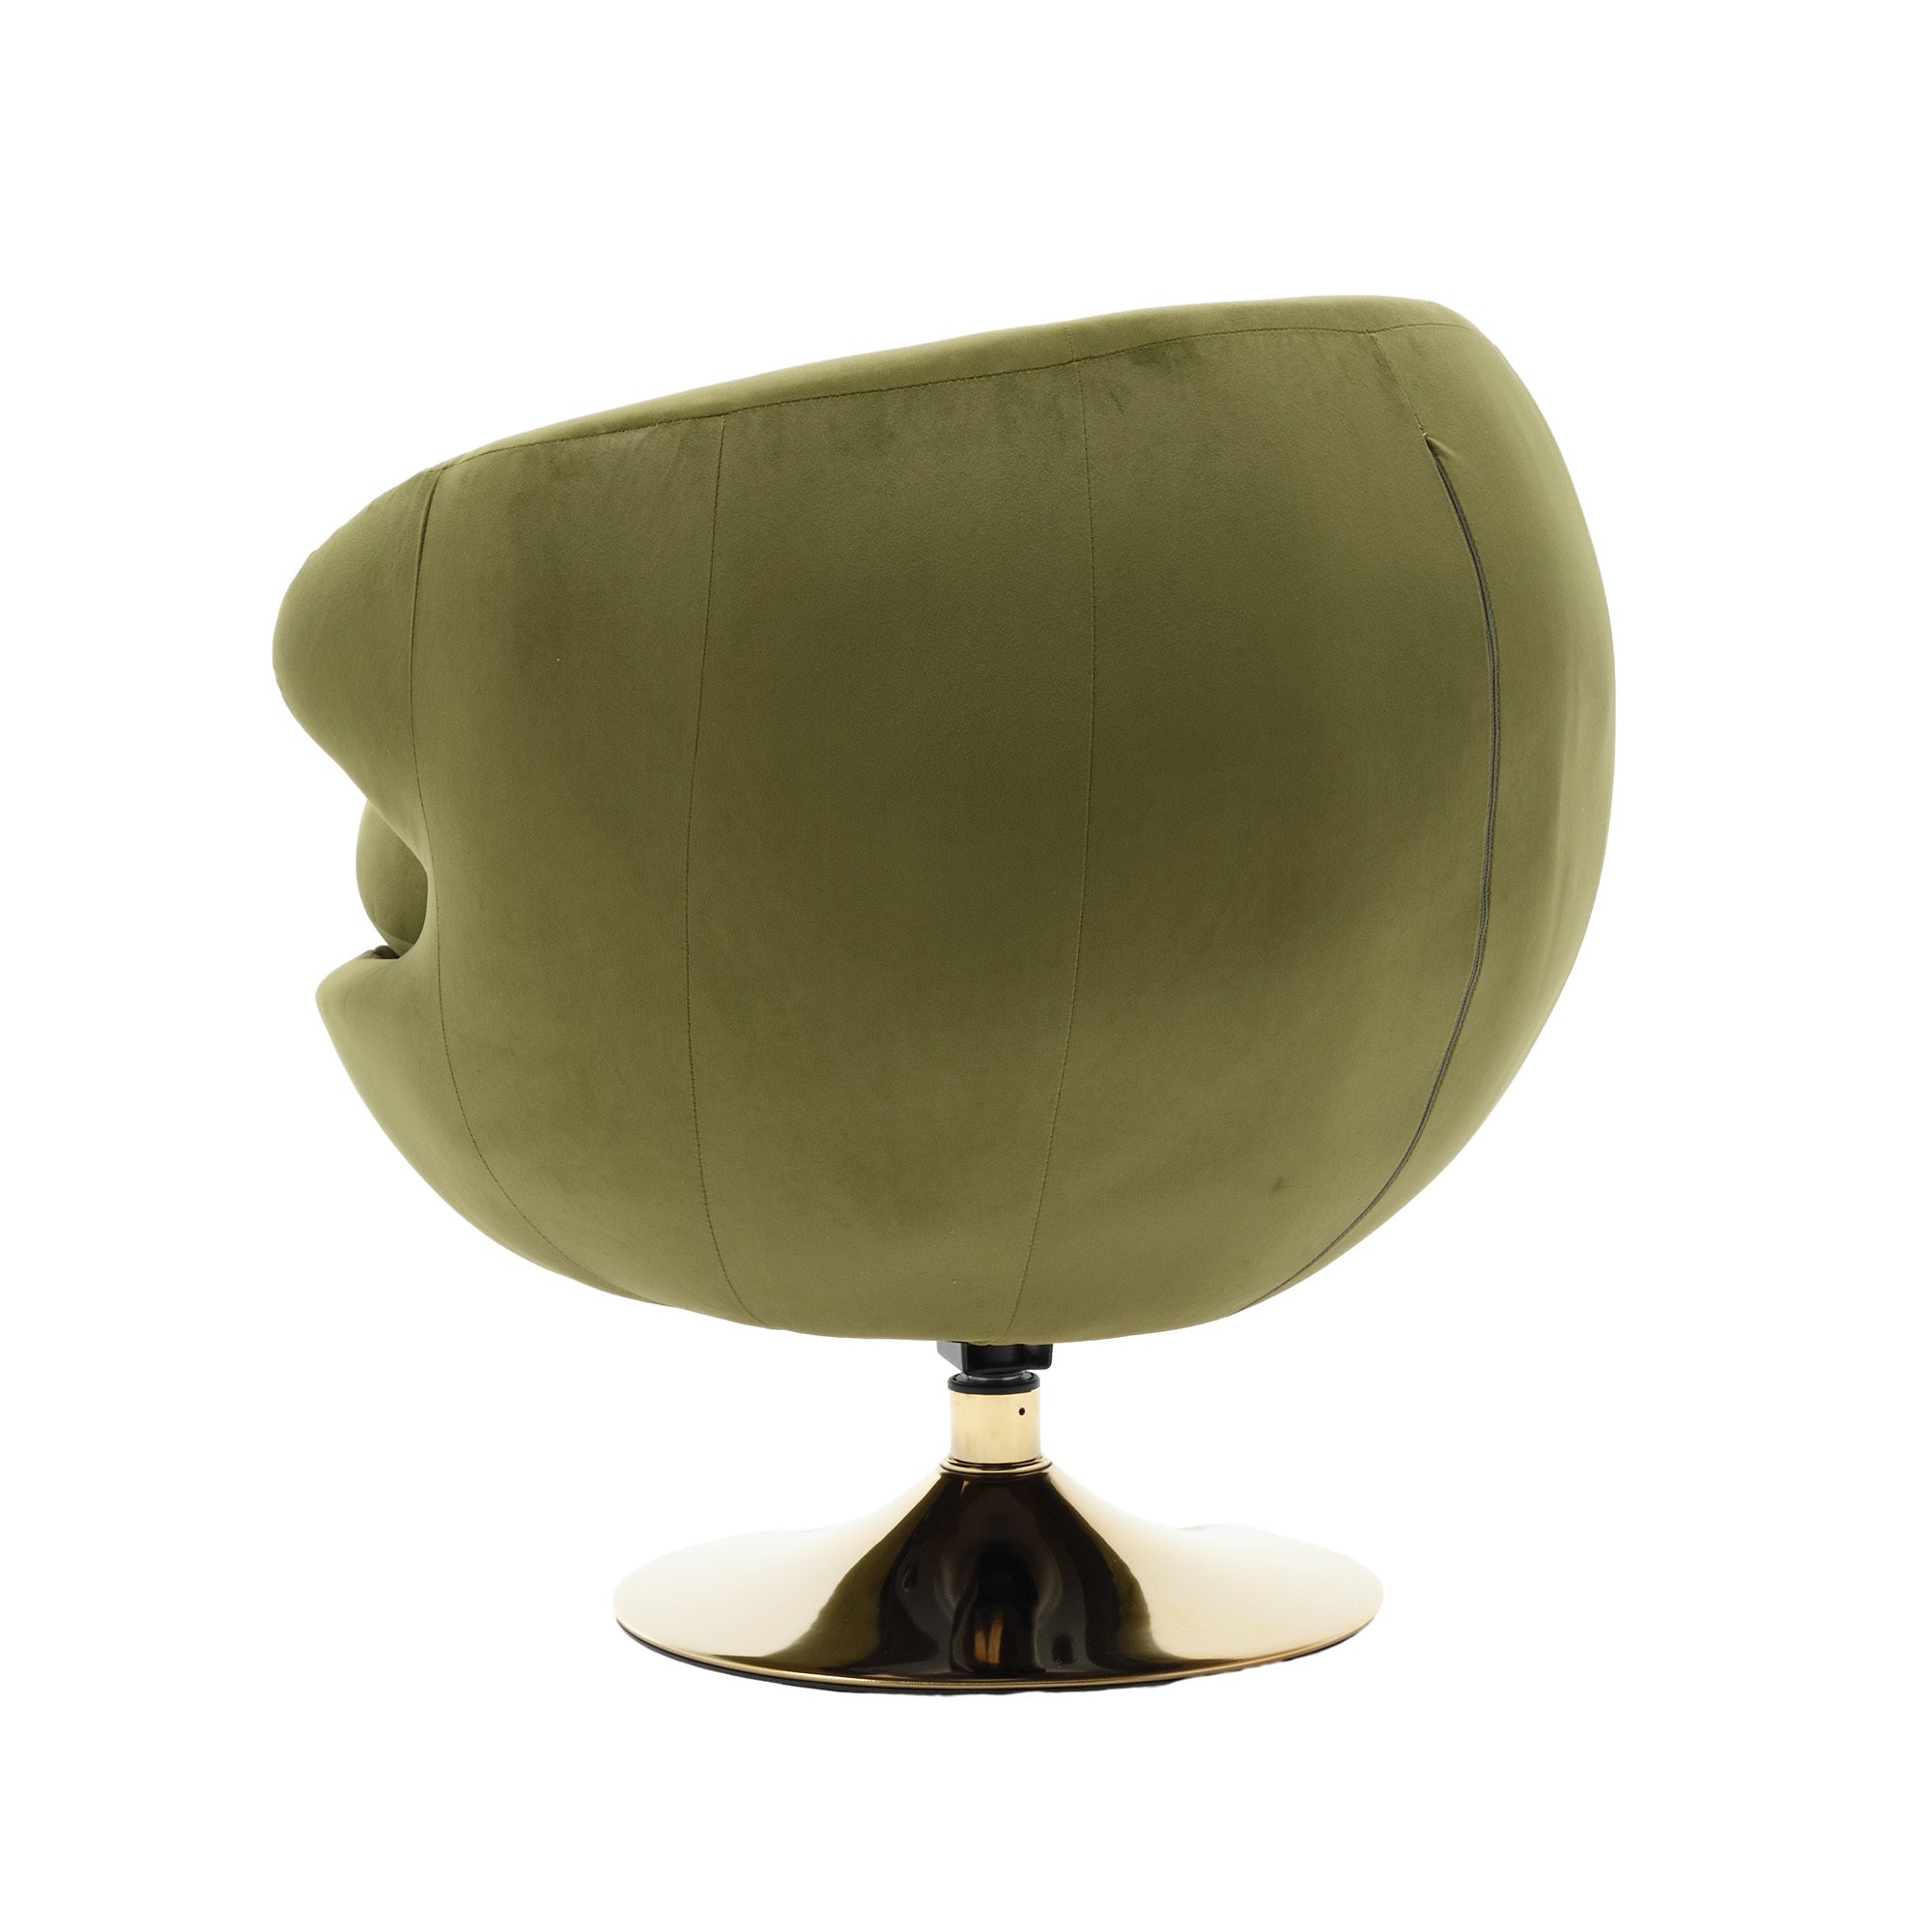 360 Degree Swivel Cuddle Barrel Accent Chairs, Round olive green-velvet